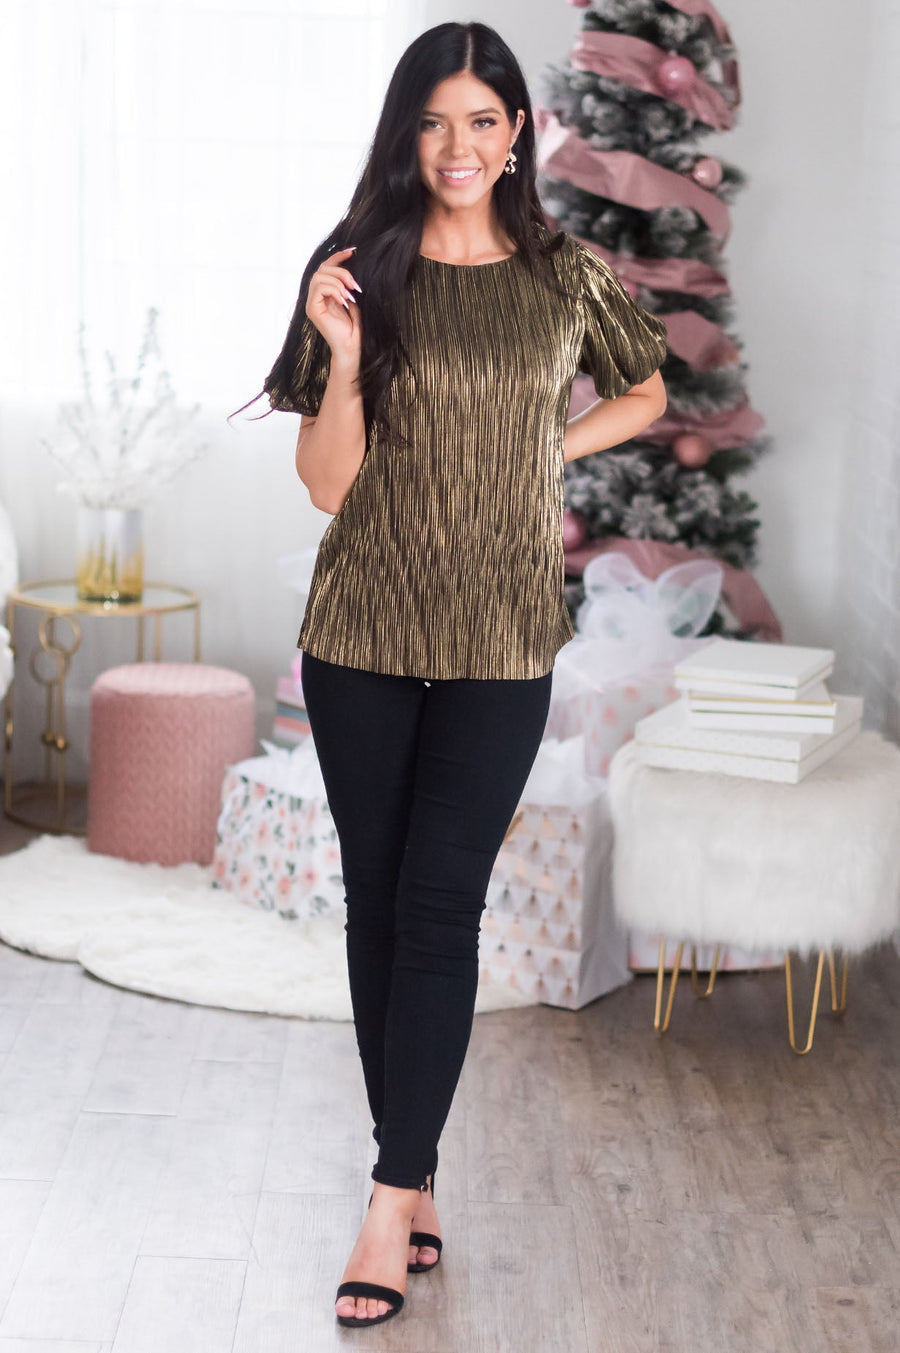 Peace on Earth Modest Metallic Top Tops vendor-unknown 